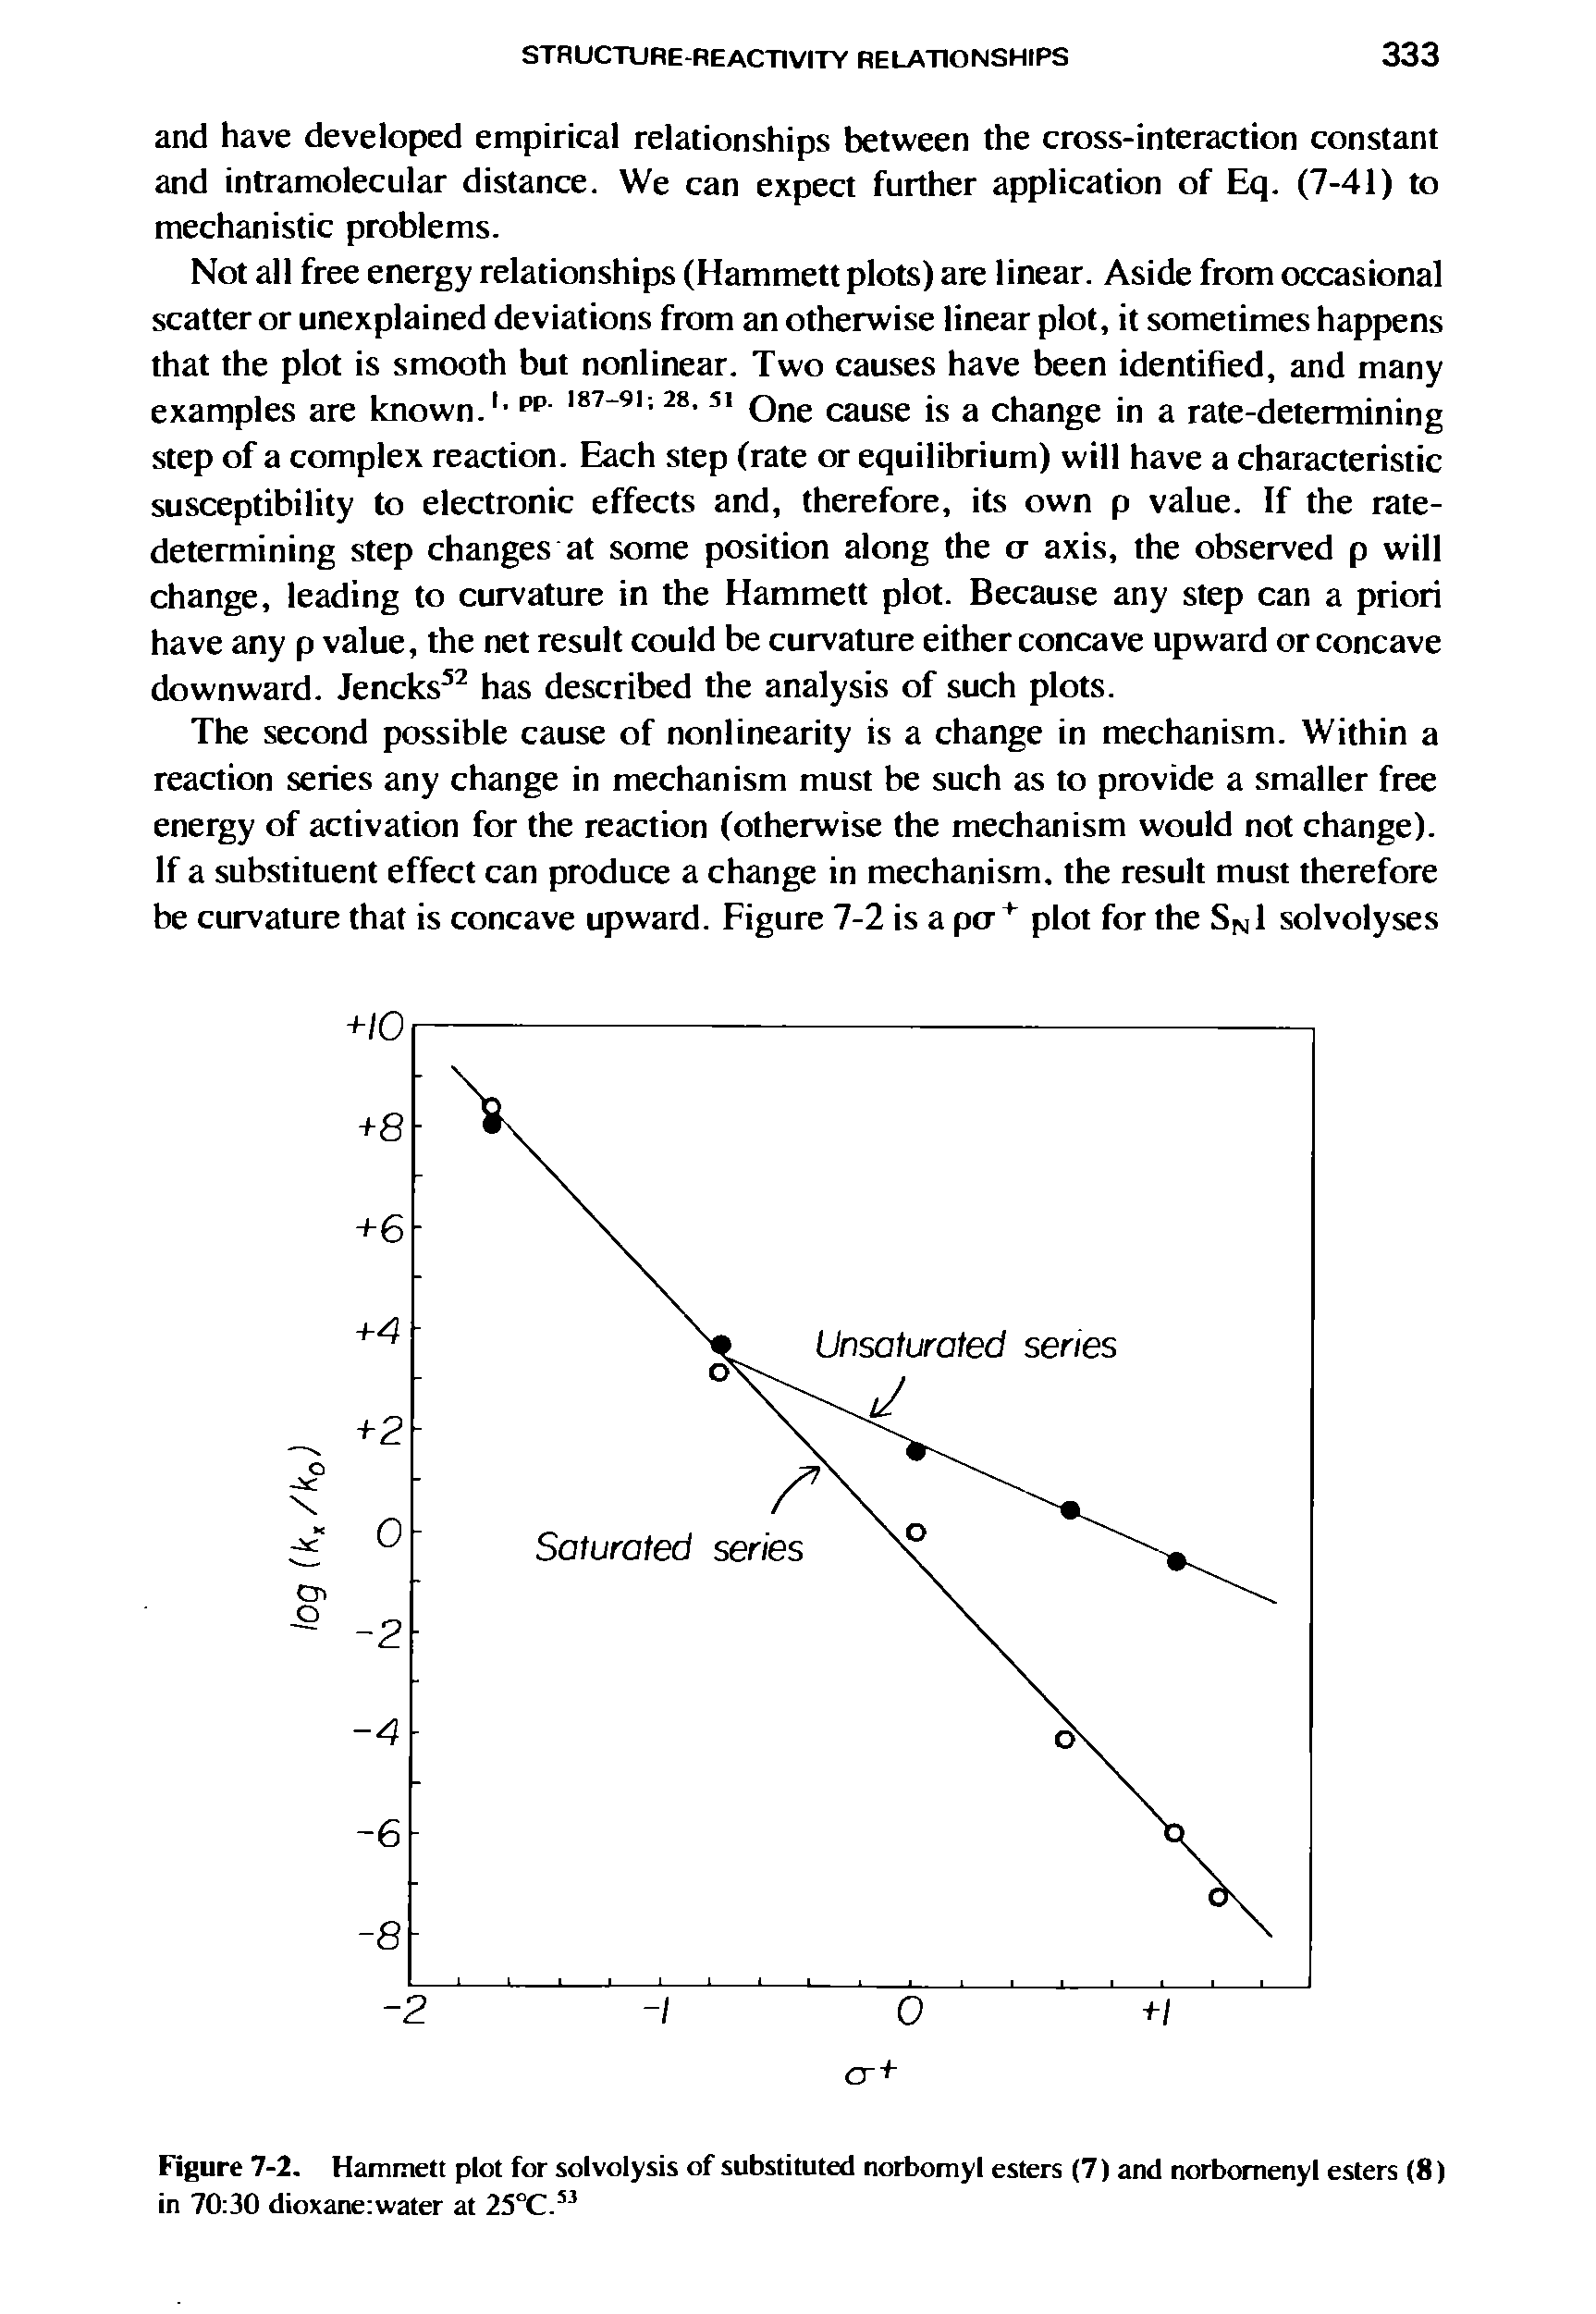 Figure 7-2. Hammett plot for solvolysis of substituted norbomyl esters (7) and norbomenyl esters (8) in 70 30 dioxaneiwater at 25°C. ...